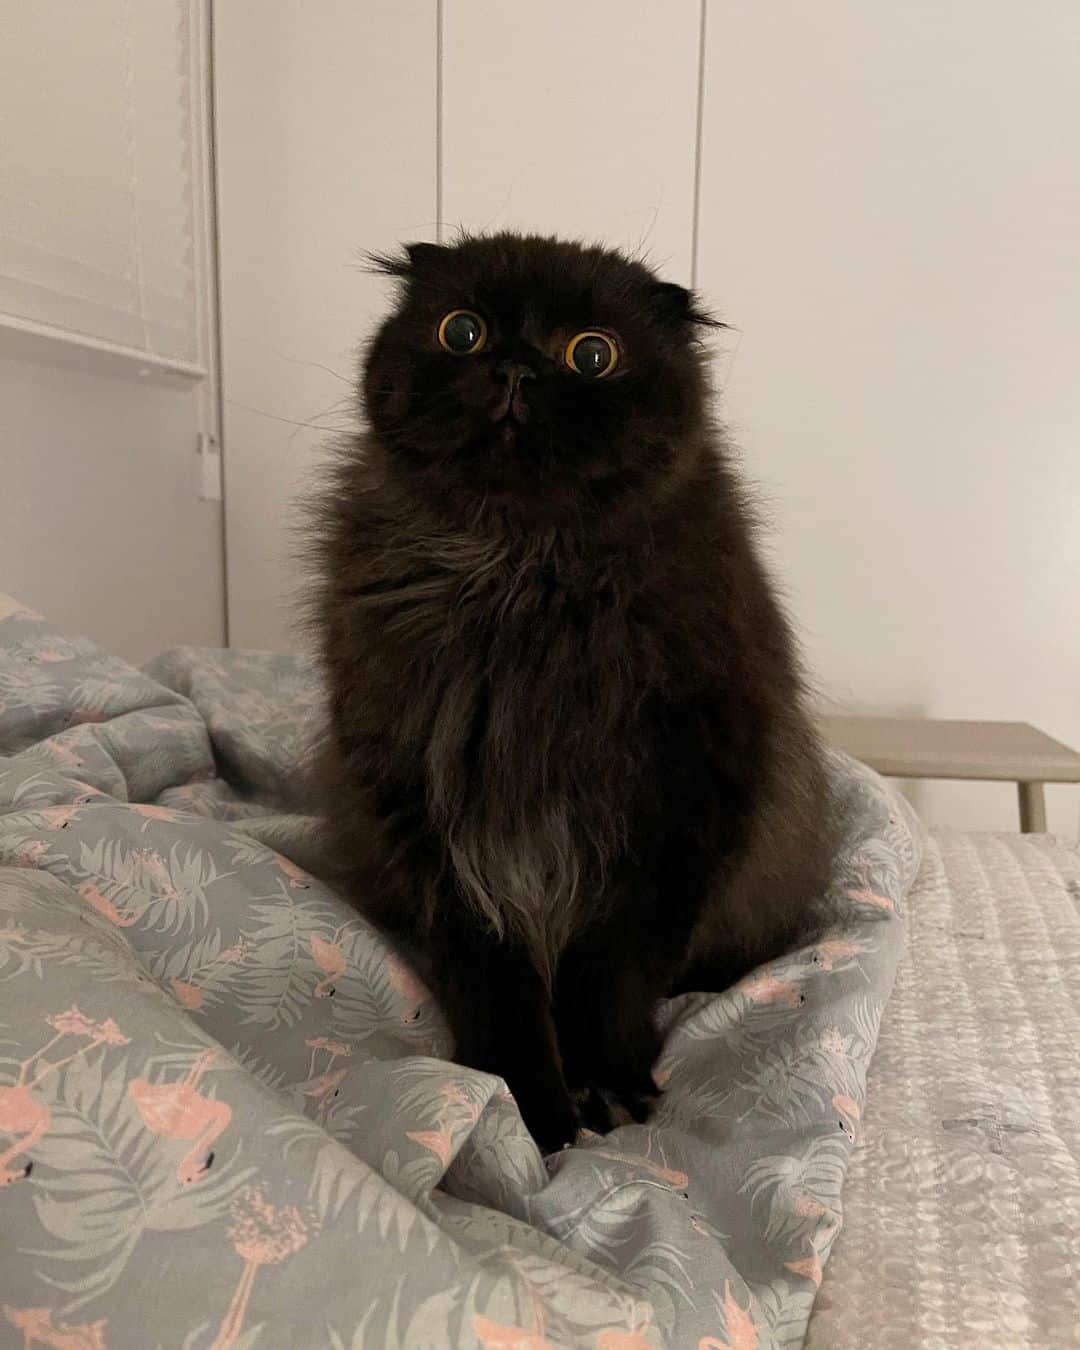 a black cat with big eyes is sitting on the bed